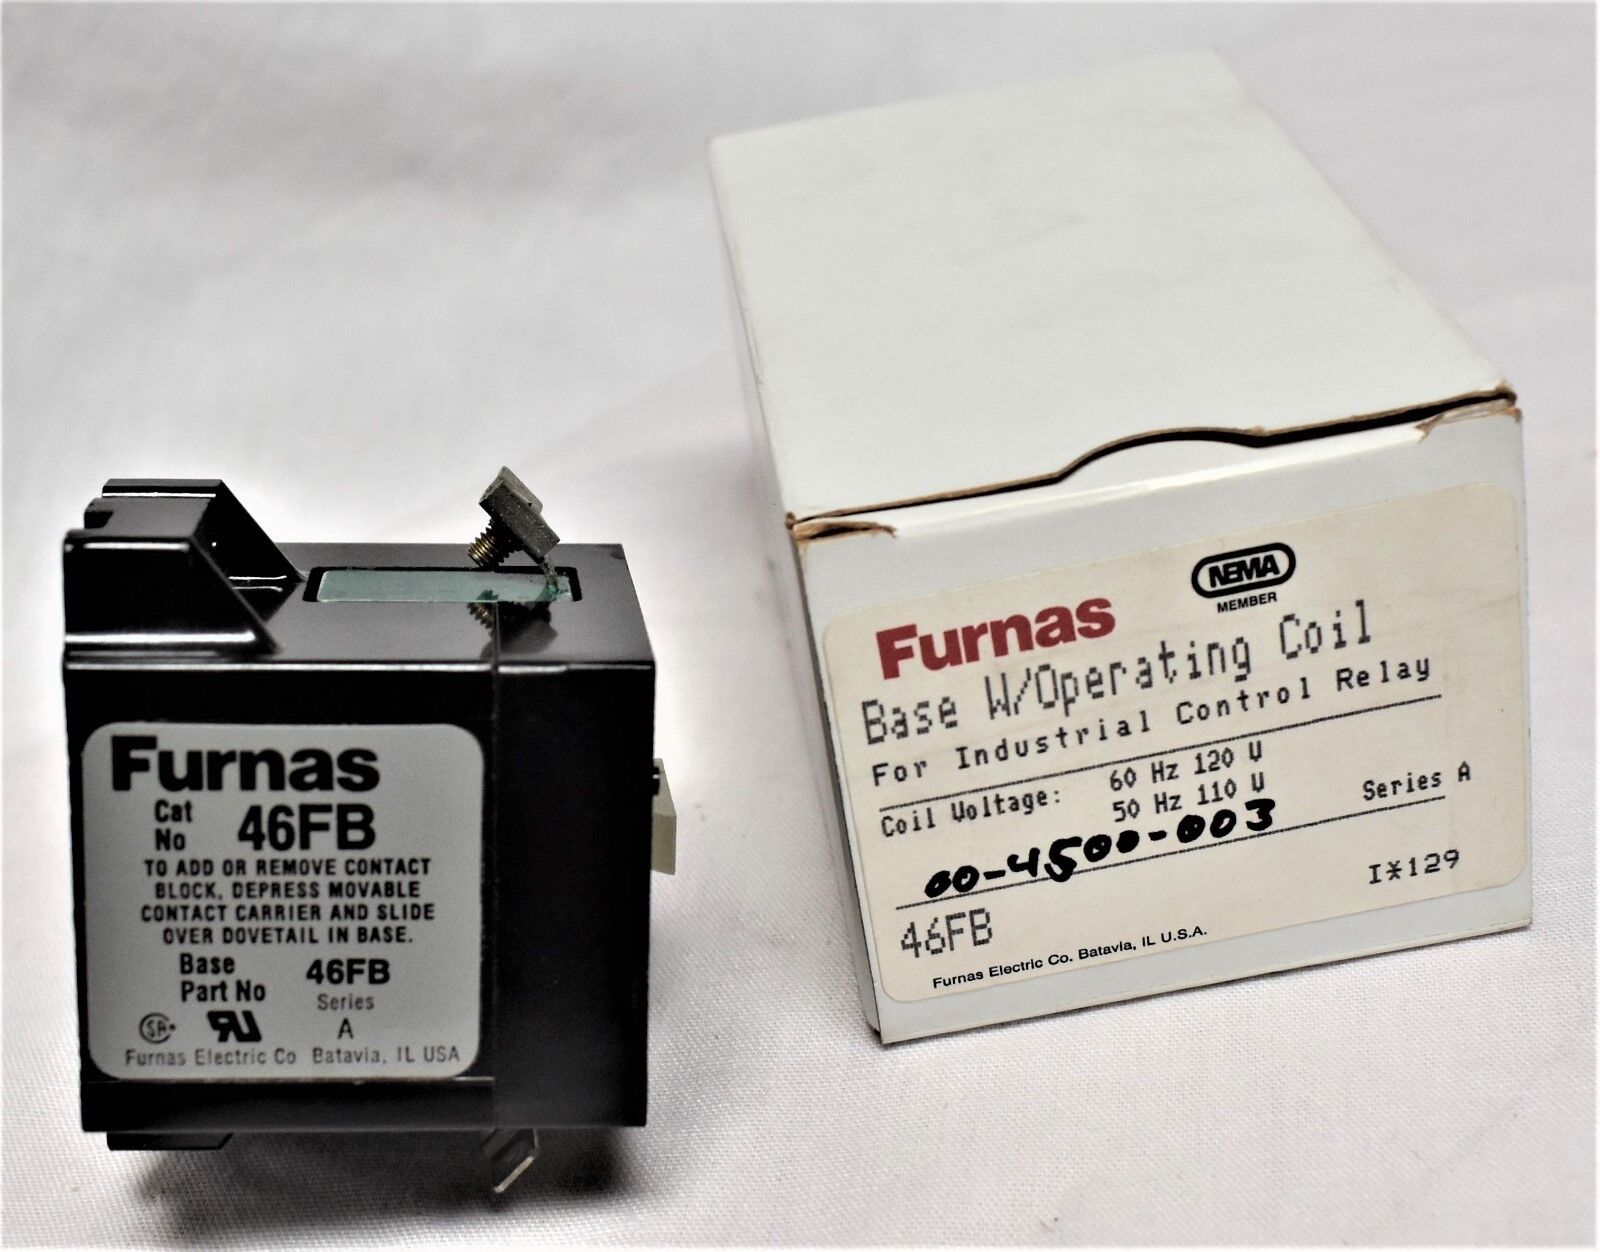 NEW Furnas 46FB Base with Operating Coil 50-60 Hz 115V Industrial Control Relay